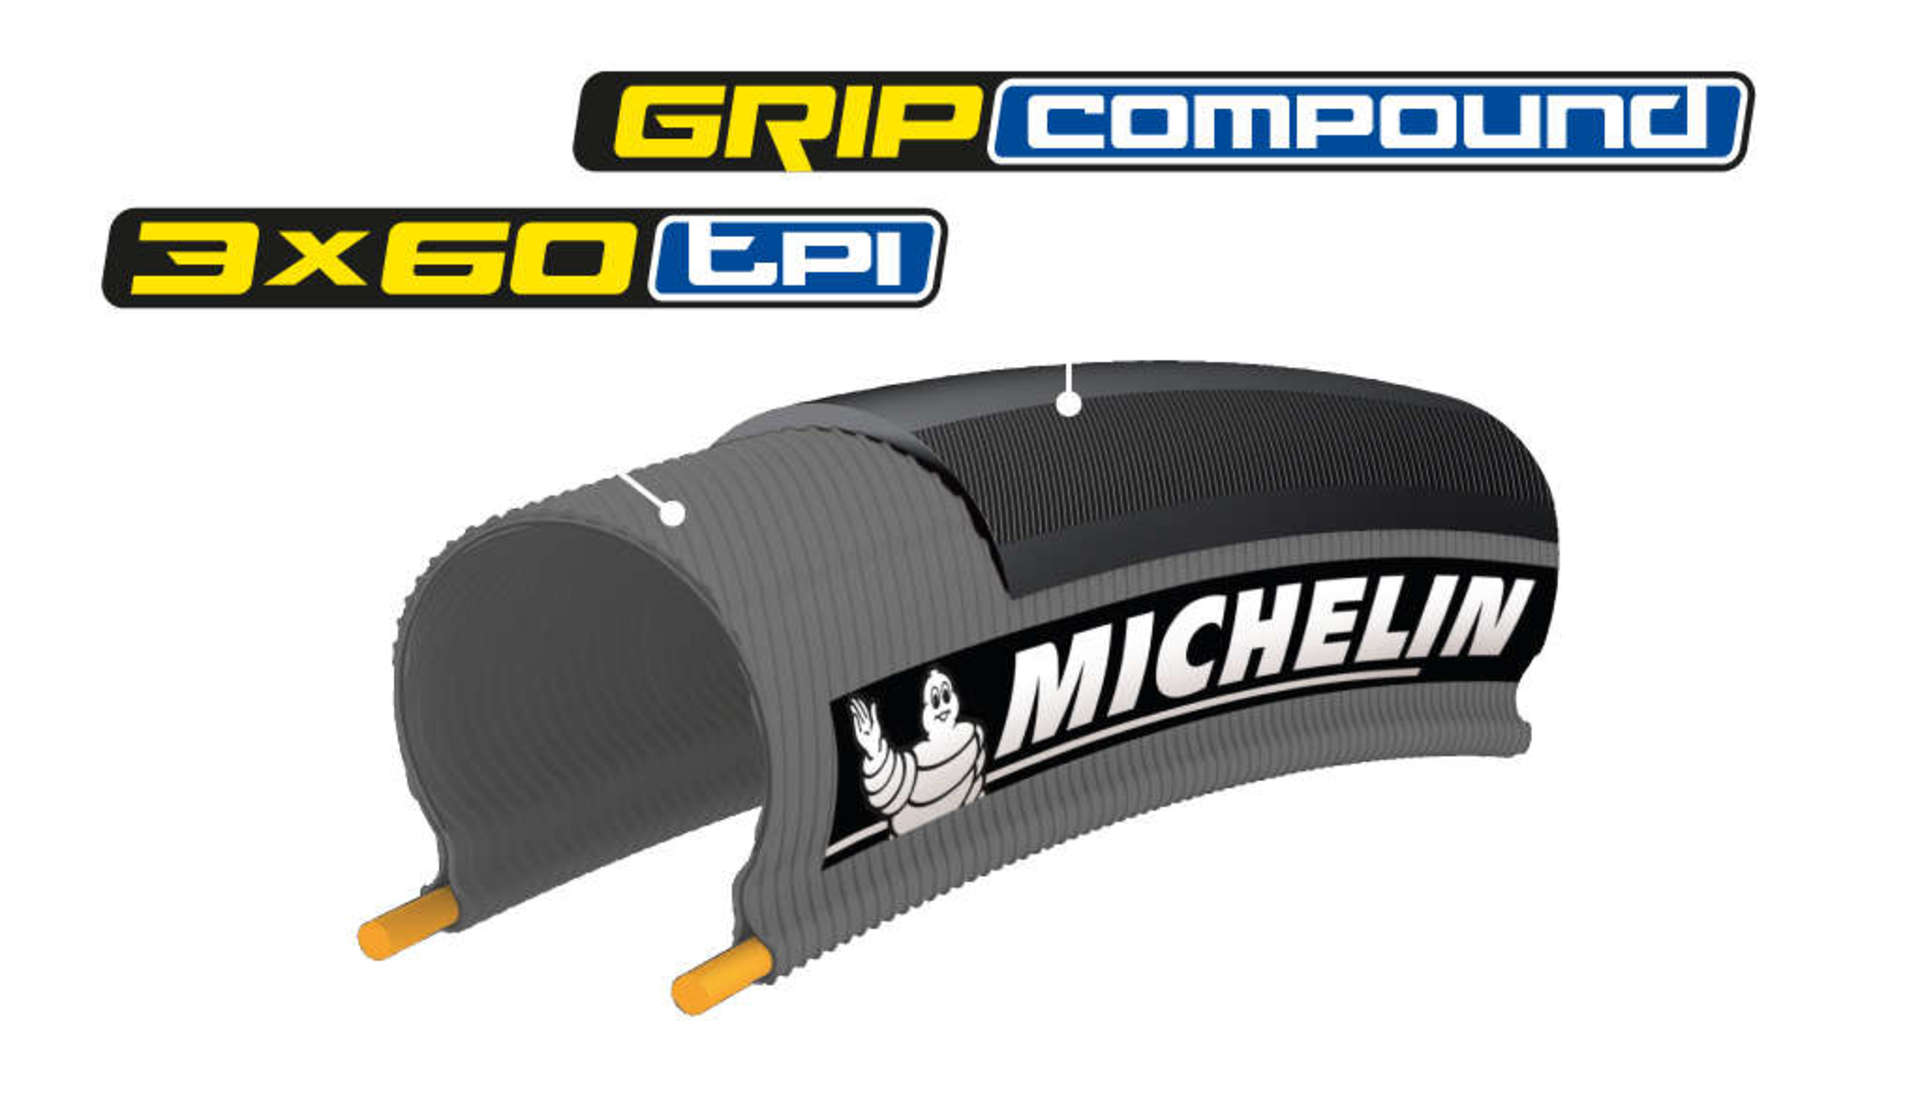 Michelin Lithion2 Racefiets Band Donkergrijs